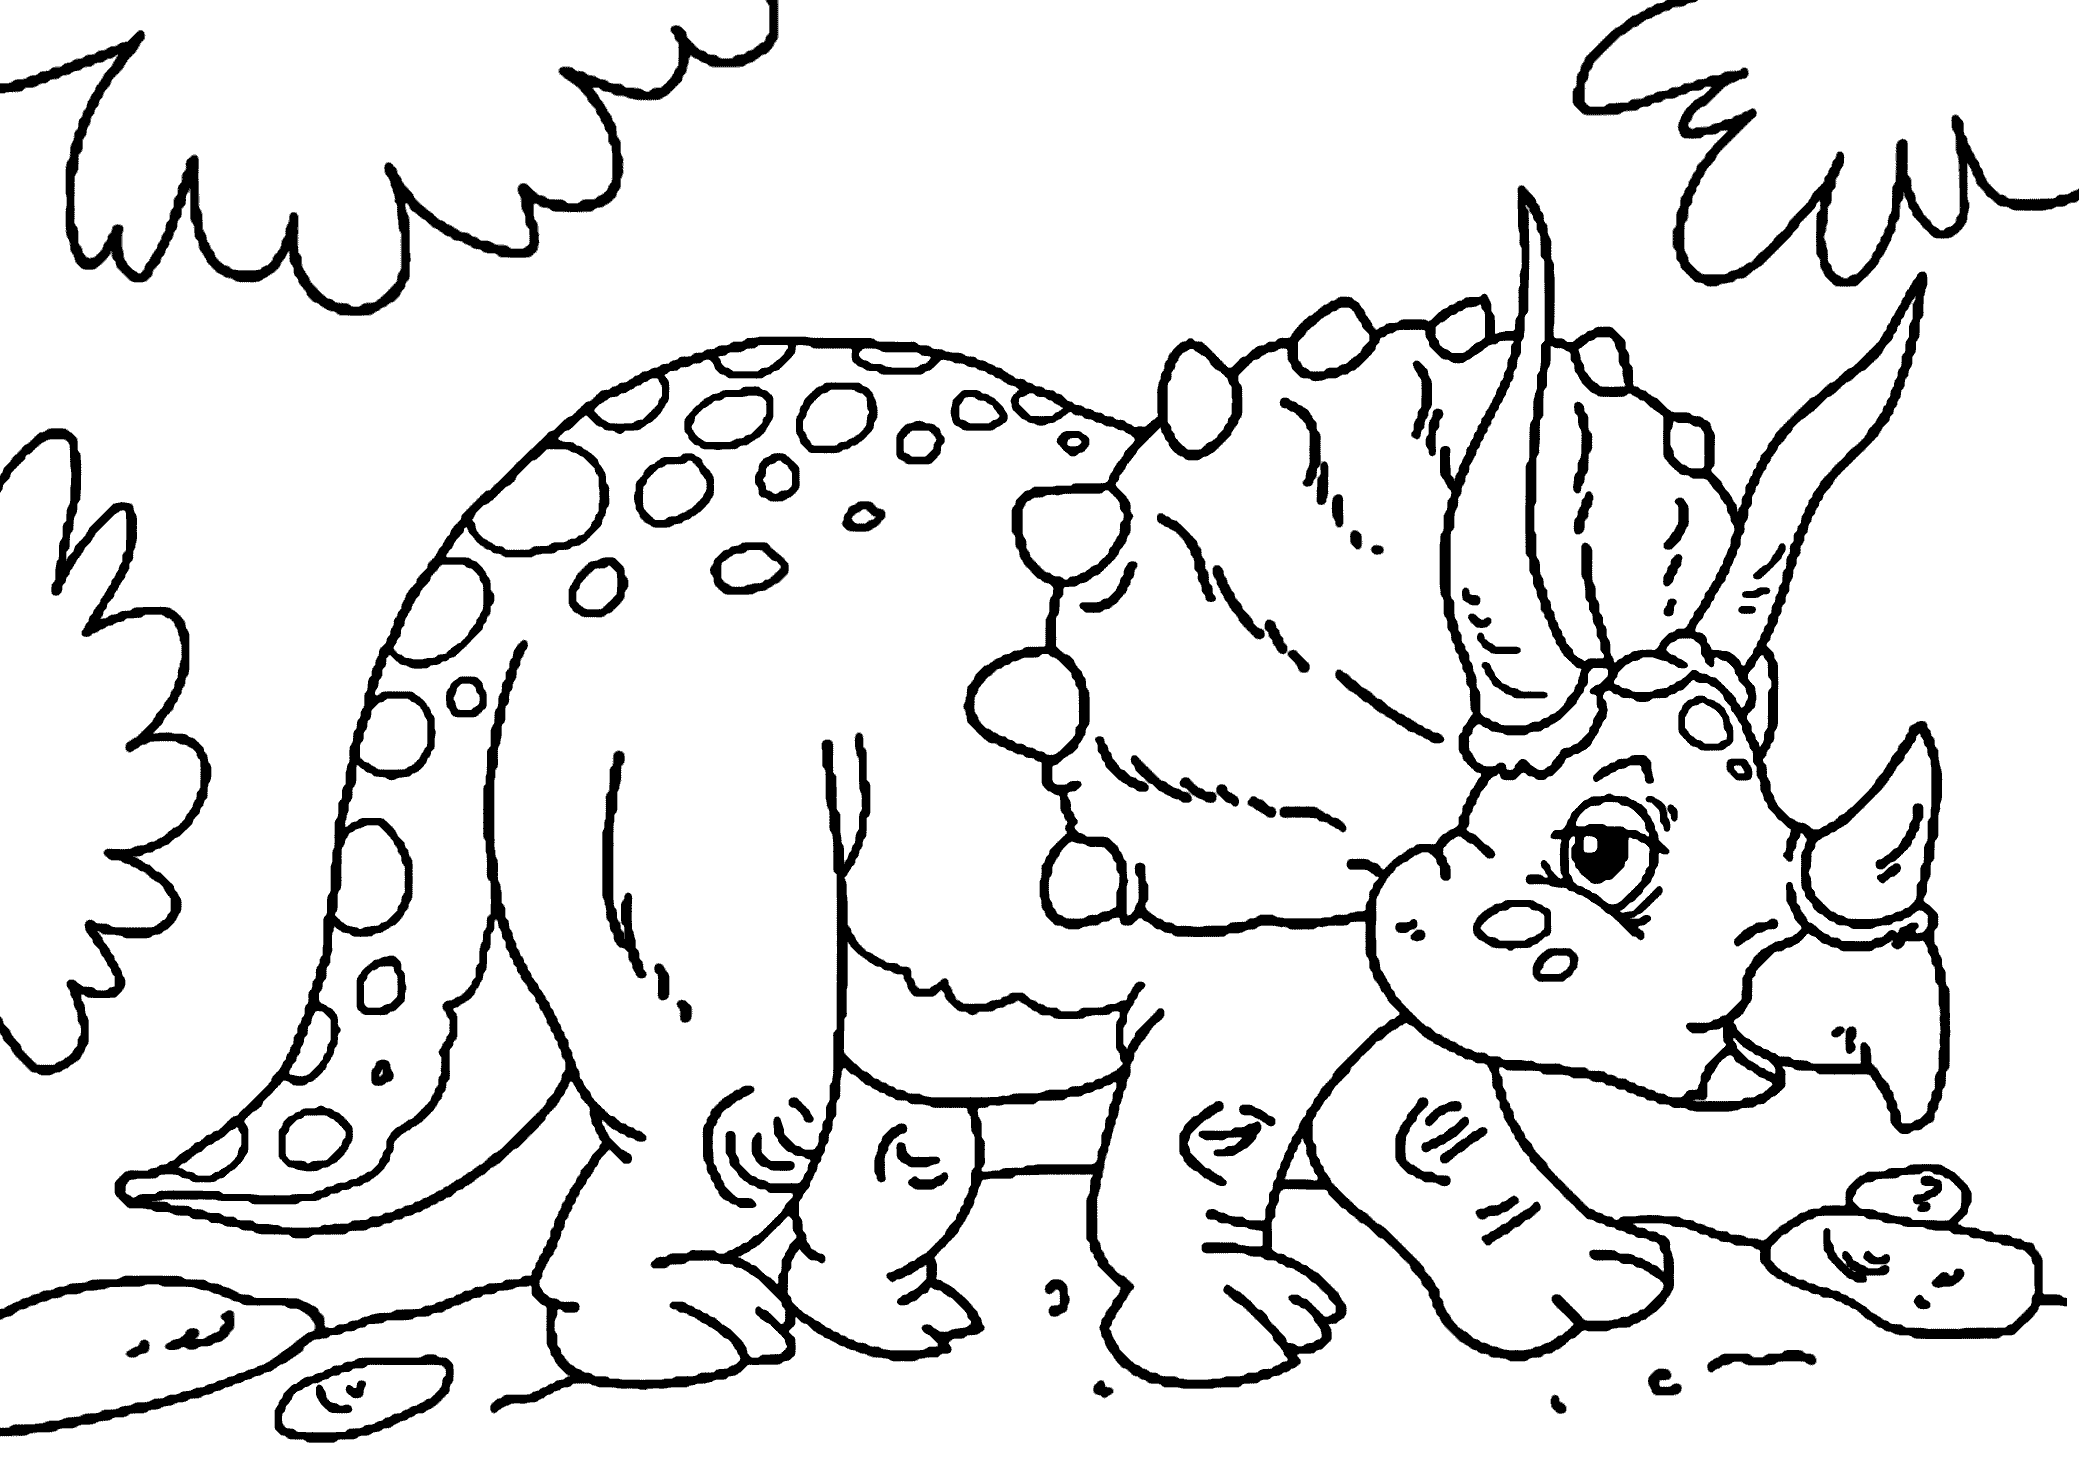 Cute little triceratops dinosaur coloring pages for kids ...